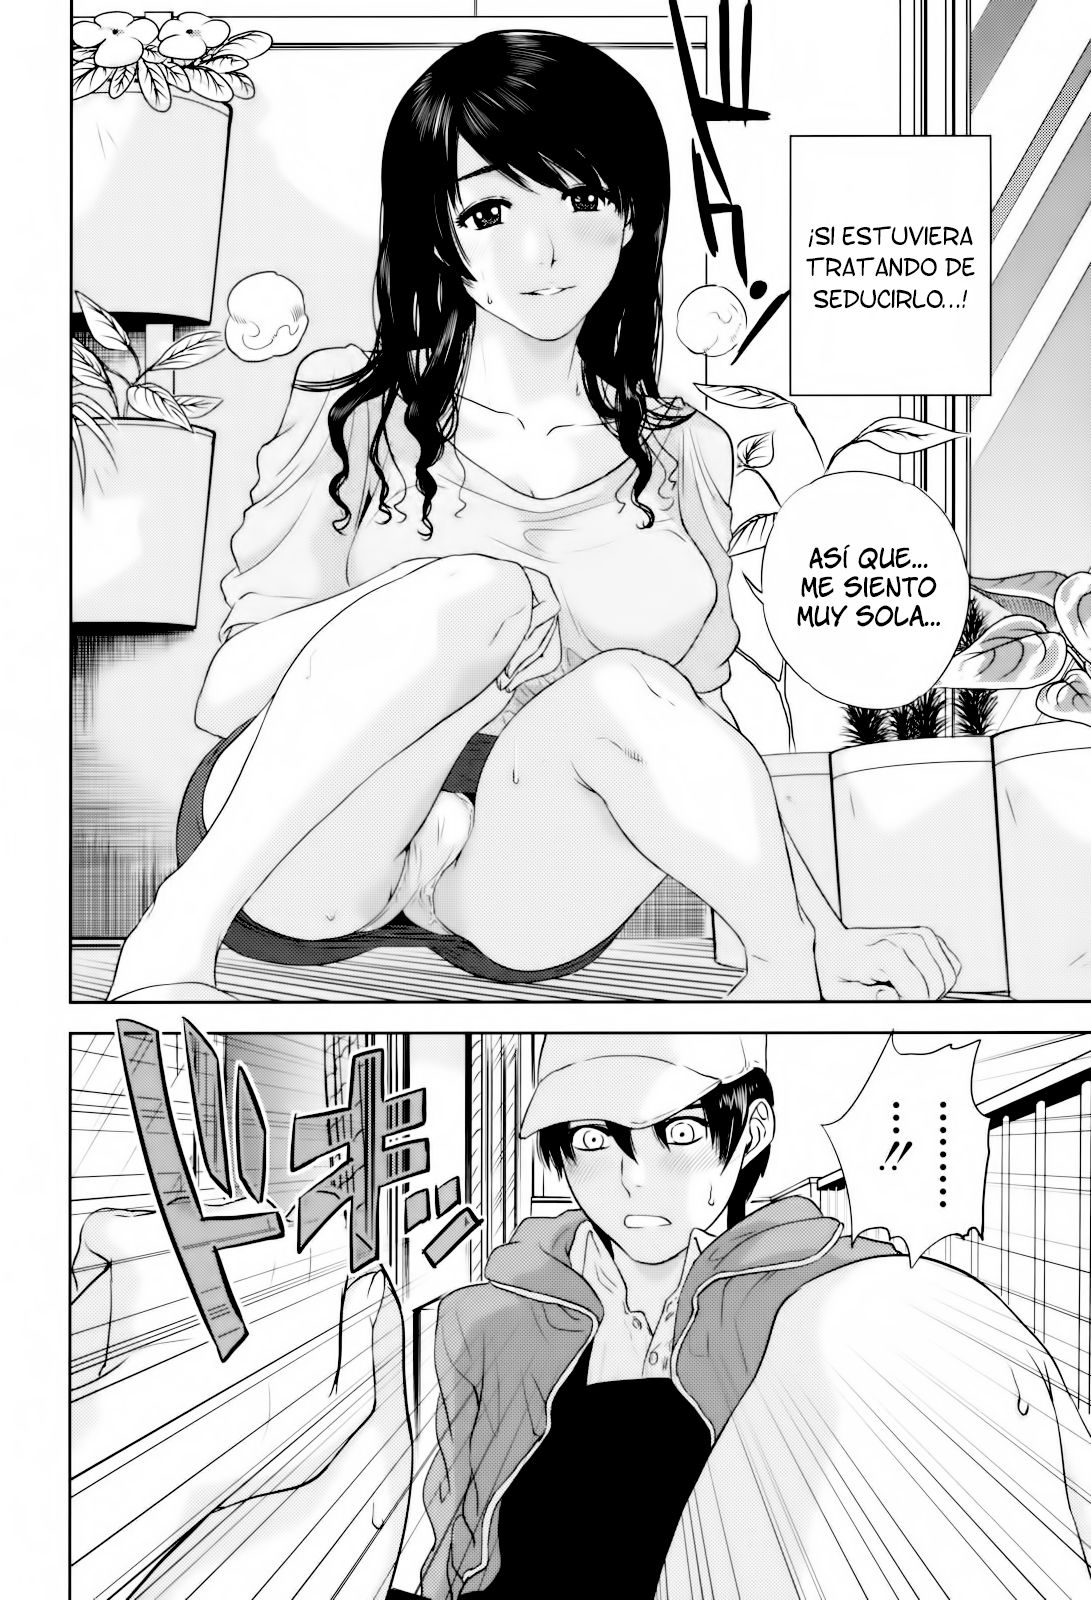 [Tohzai] Okusan to Issho - To be with married woman Ch. 1-5 [Spanish] [RaisserScans] [東西] 人妻さんといっしょ♥ 第1-5話 [スペイン翻訳]